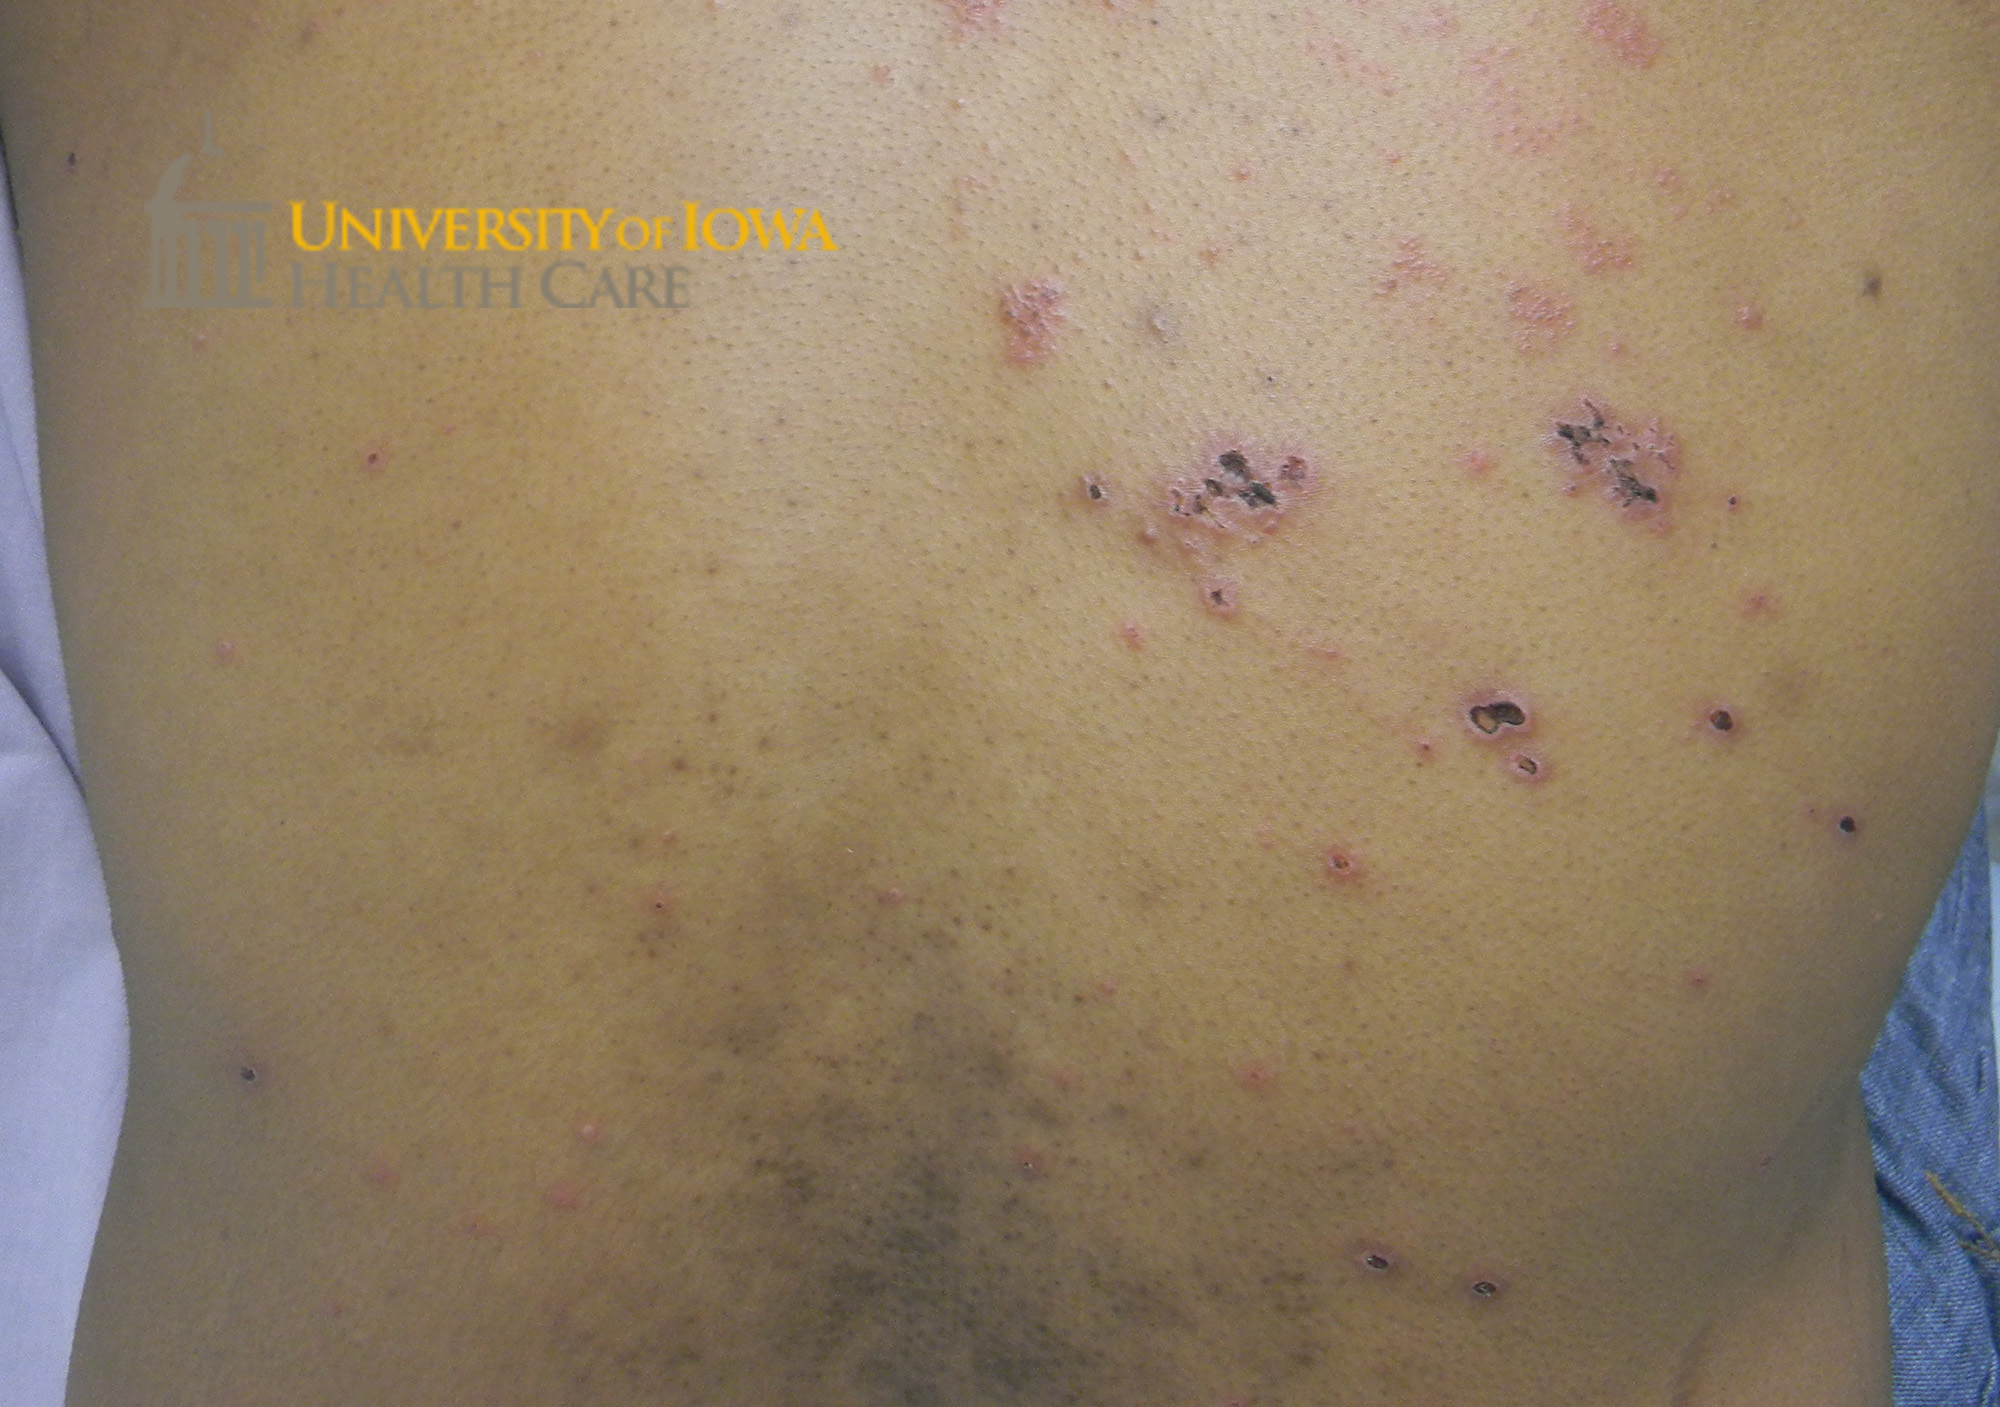 Many pink papules and vesicles, some with central erosion and some with heme-crusting on the back. (click images for higher resolution).